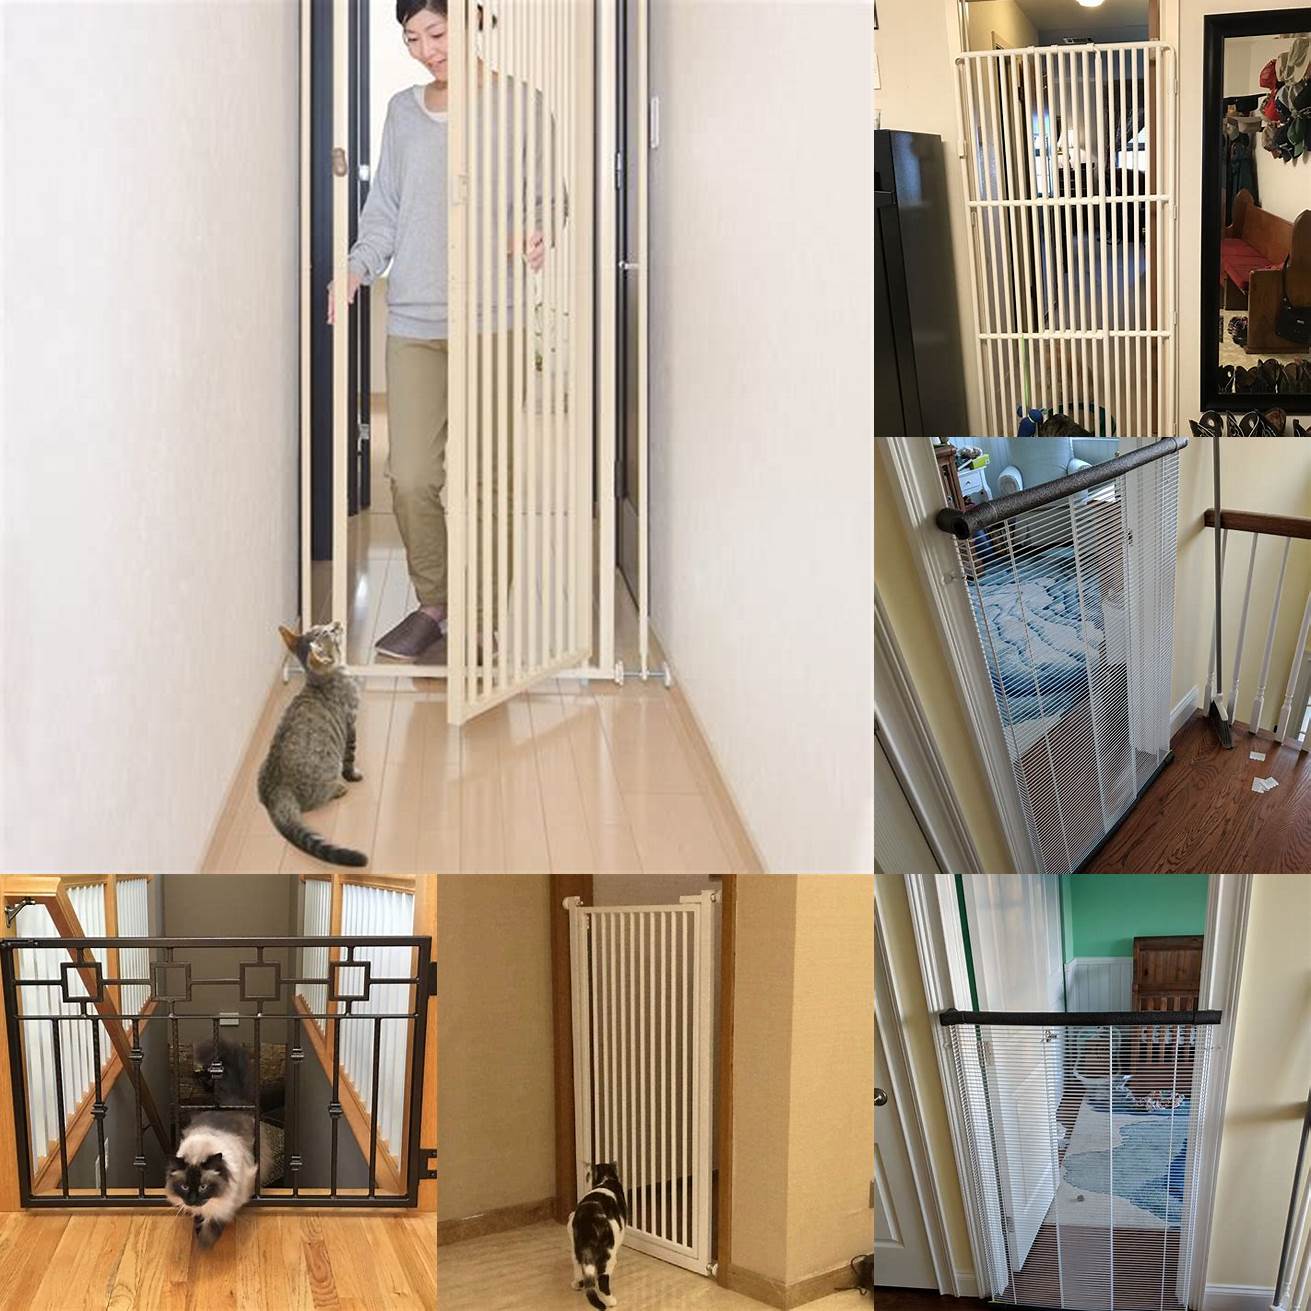 Adjust as needed If your cat seems to be having trouble with the cat gate try adjusting it to make it more comfortable for them